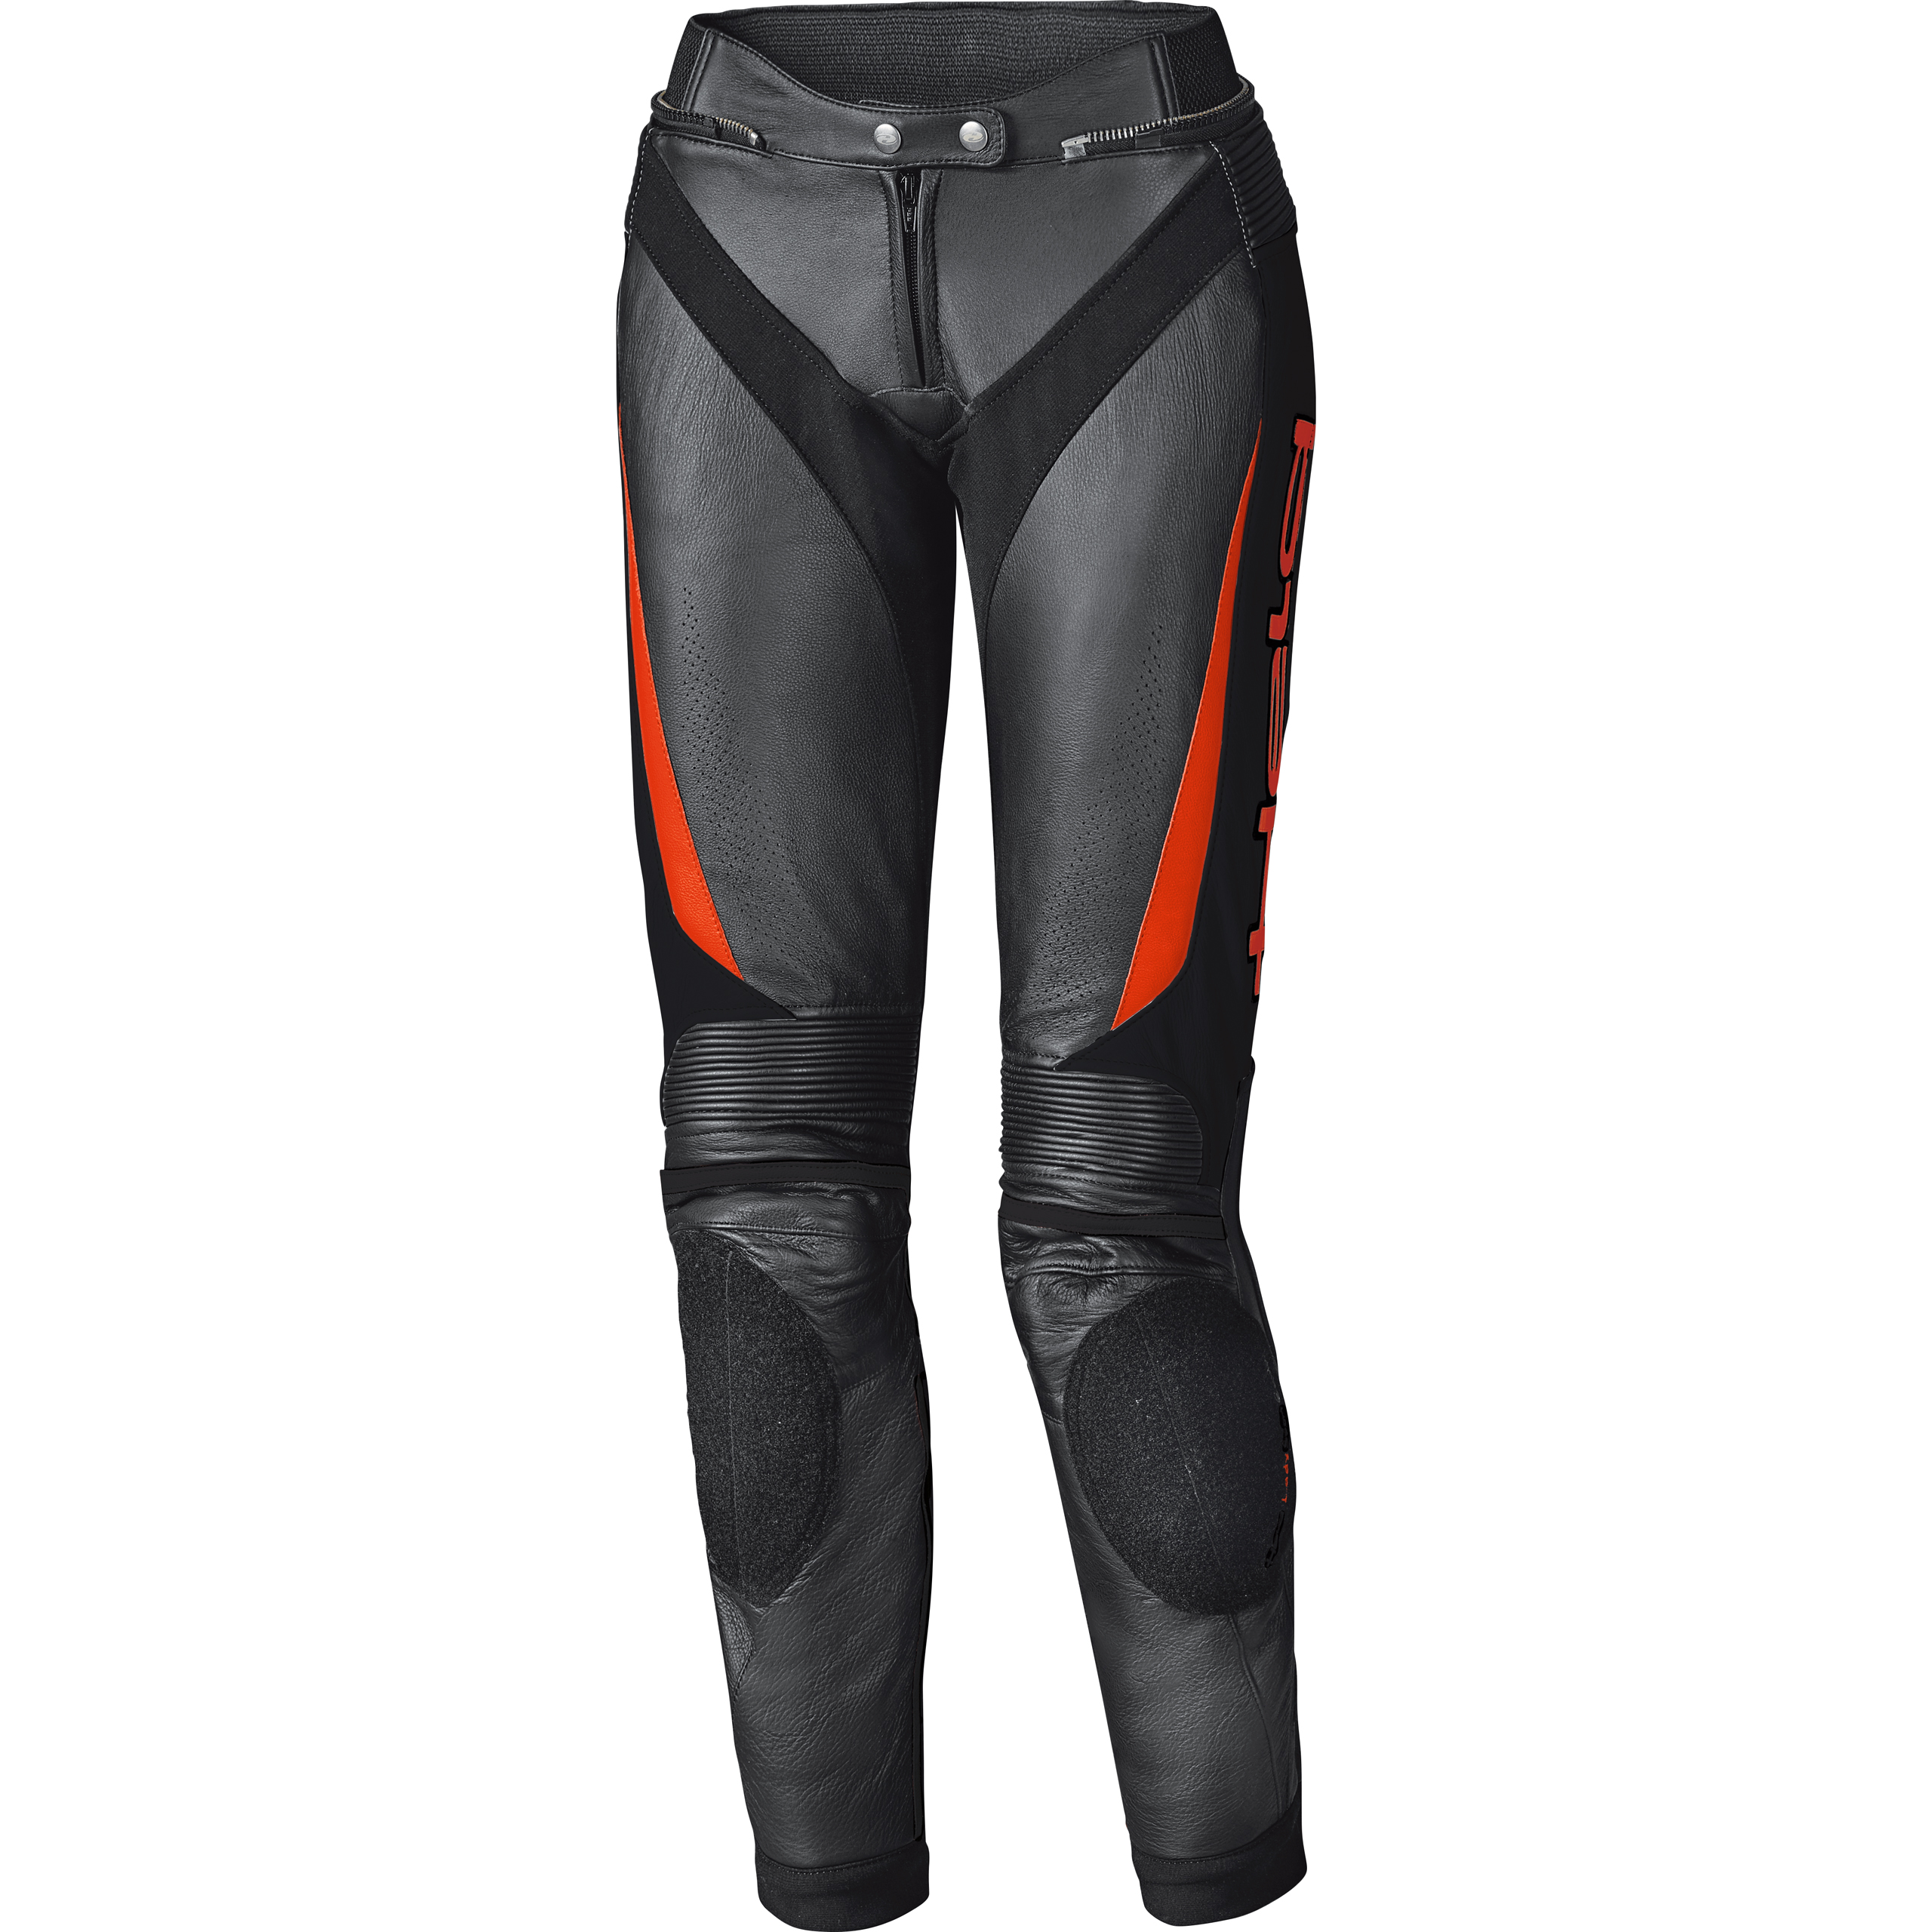 MO Tested: Dainese Racing 3 Perf. Leather Jacket And Delta 3 Perf. Leather  Pants Review | Motorcycle.com